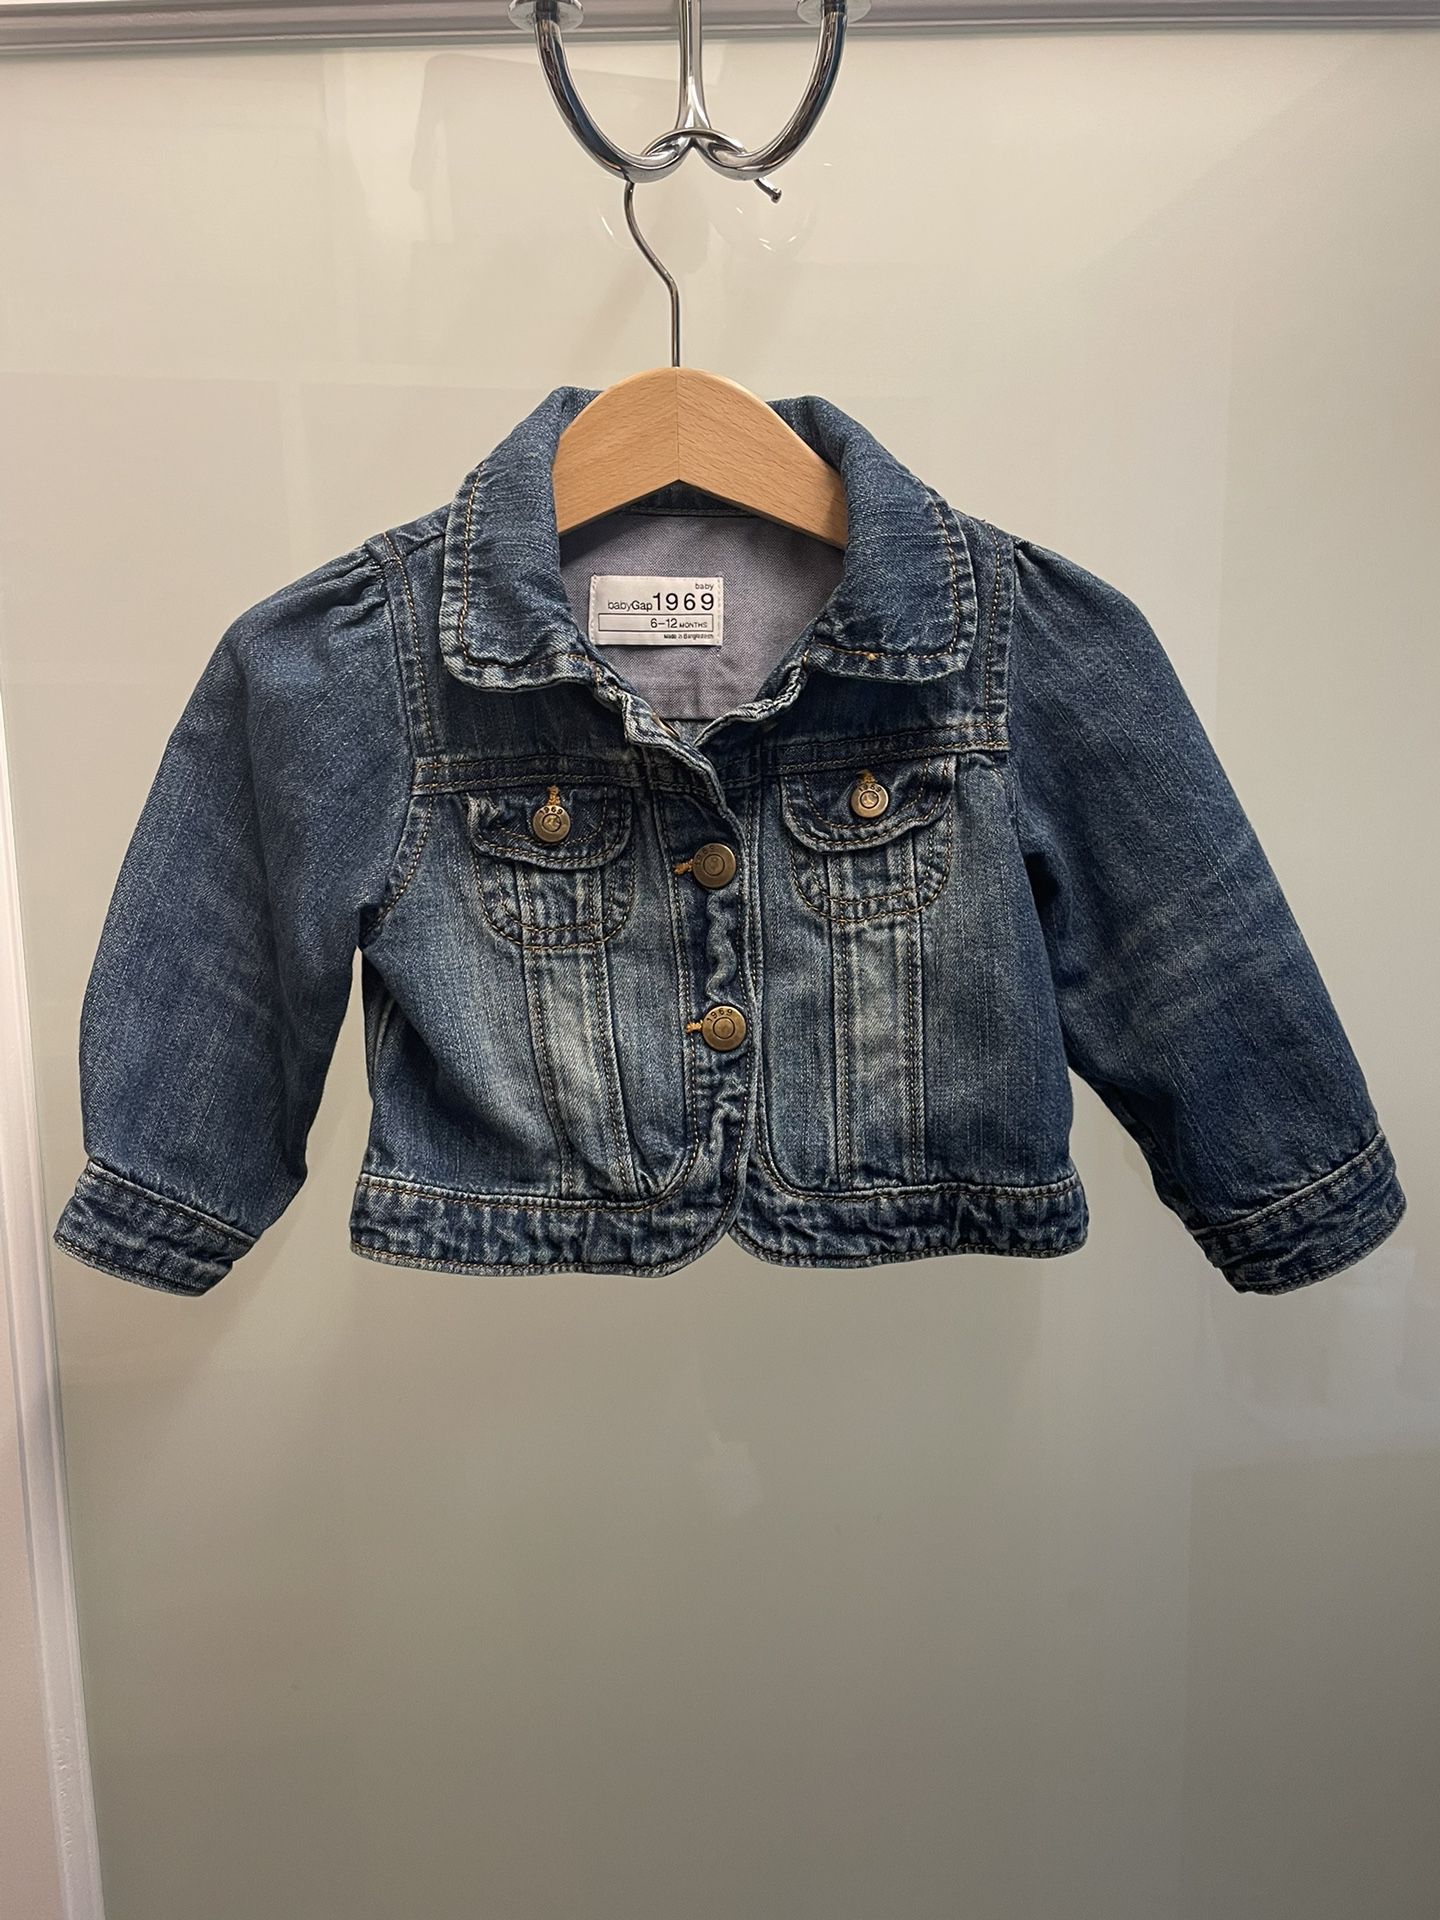 Baby Gap Jean Jacket - Like New - 6 To 12 Months